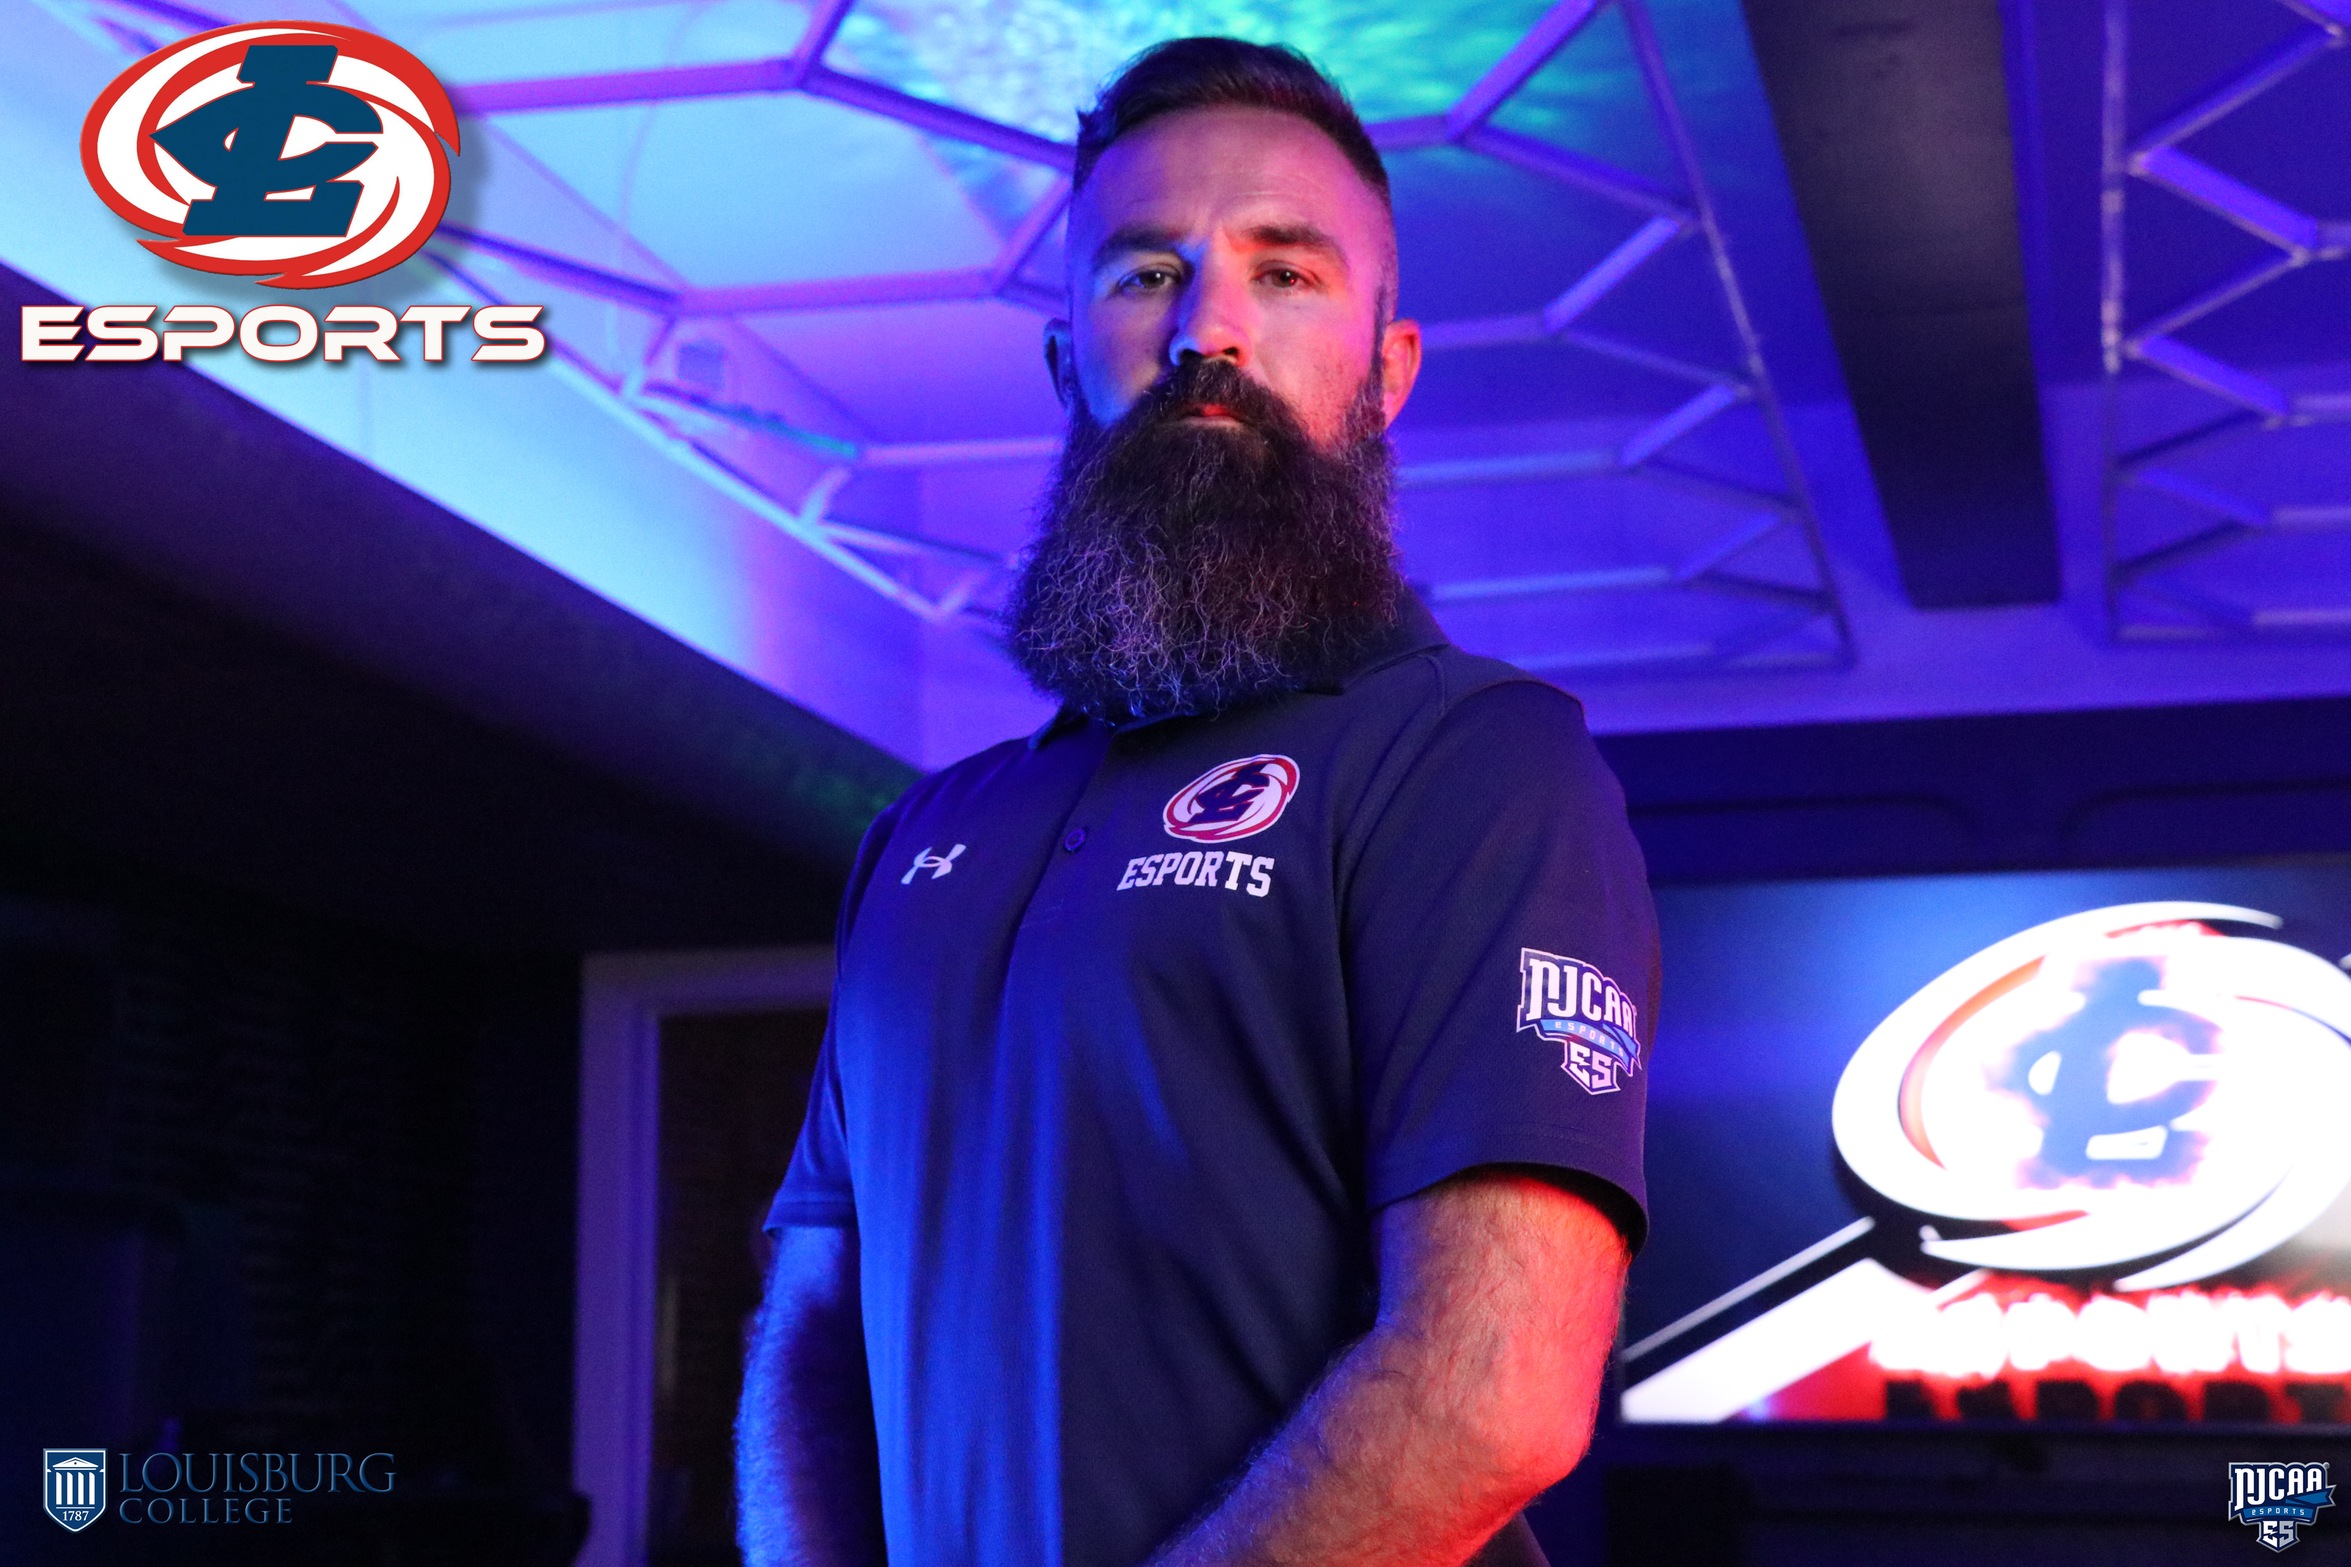 New Esports Coach at the helm for the Hurricanes